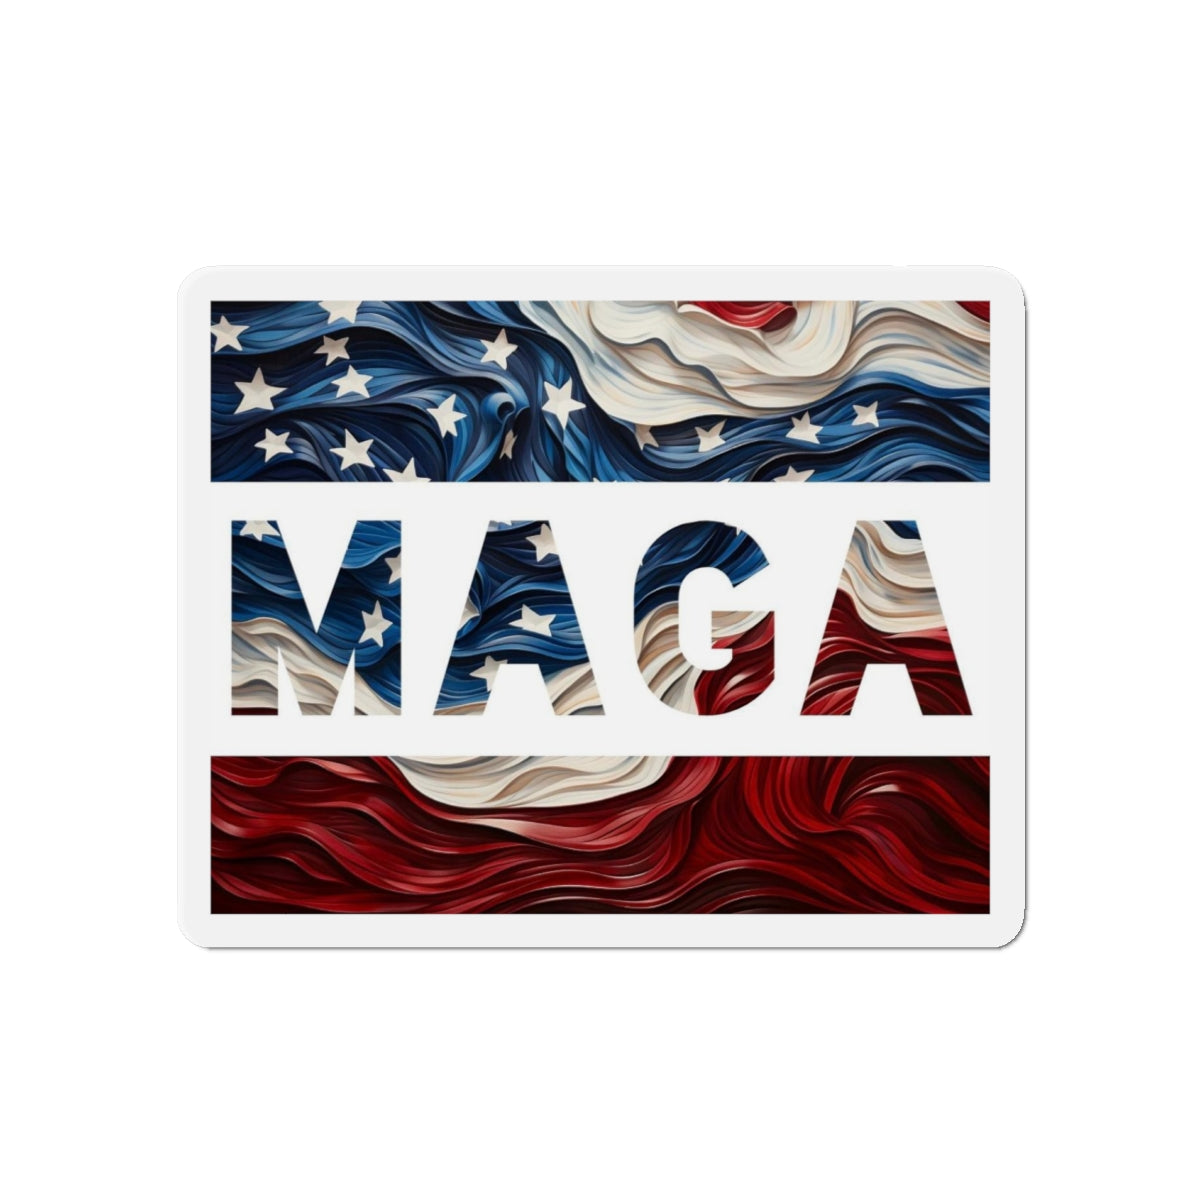 MAGA Trump Red White and Blue Die-Cut Magnet